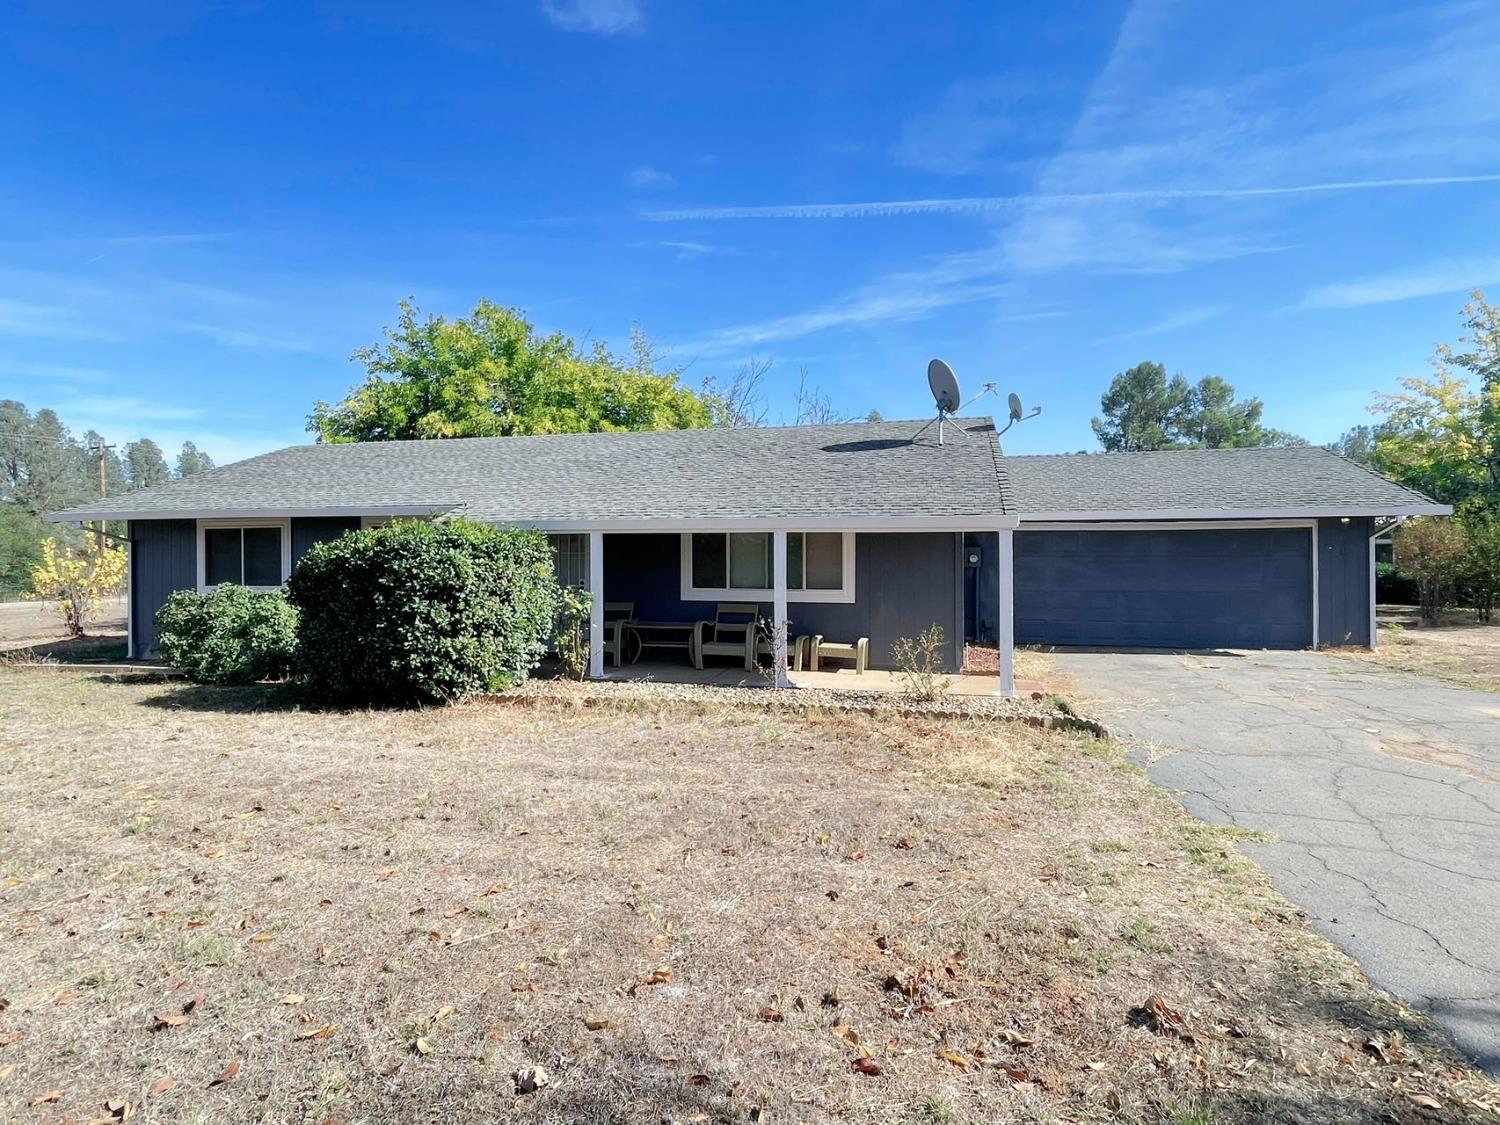 Photo of 5837 Happy Valley Rd in Anderson, CA